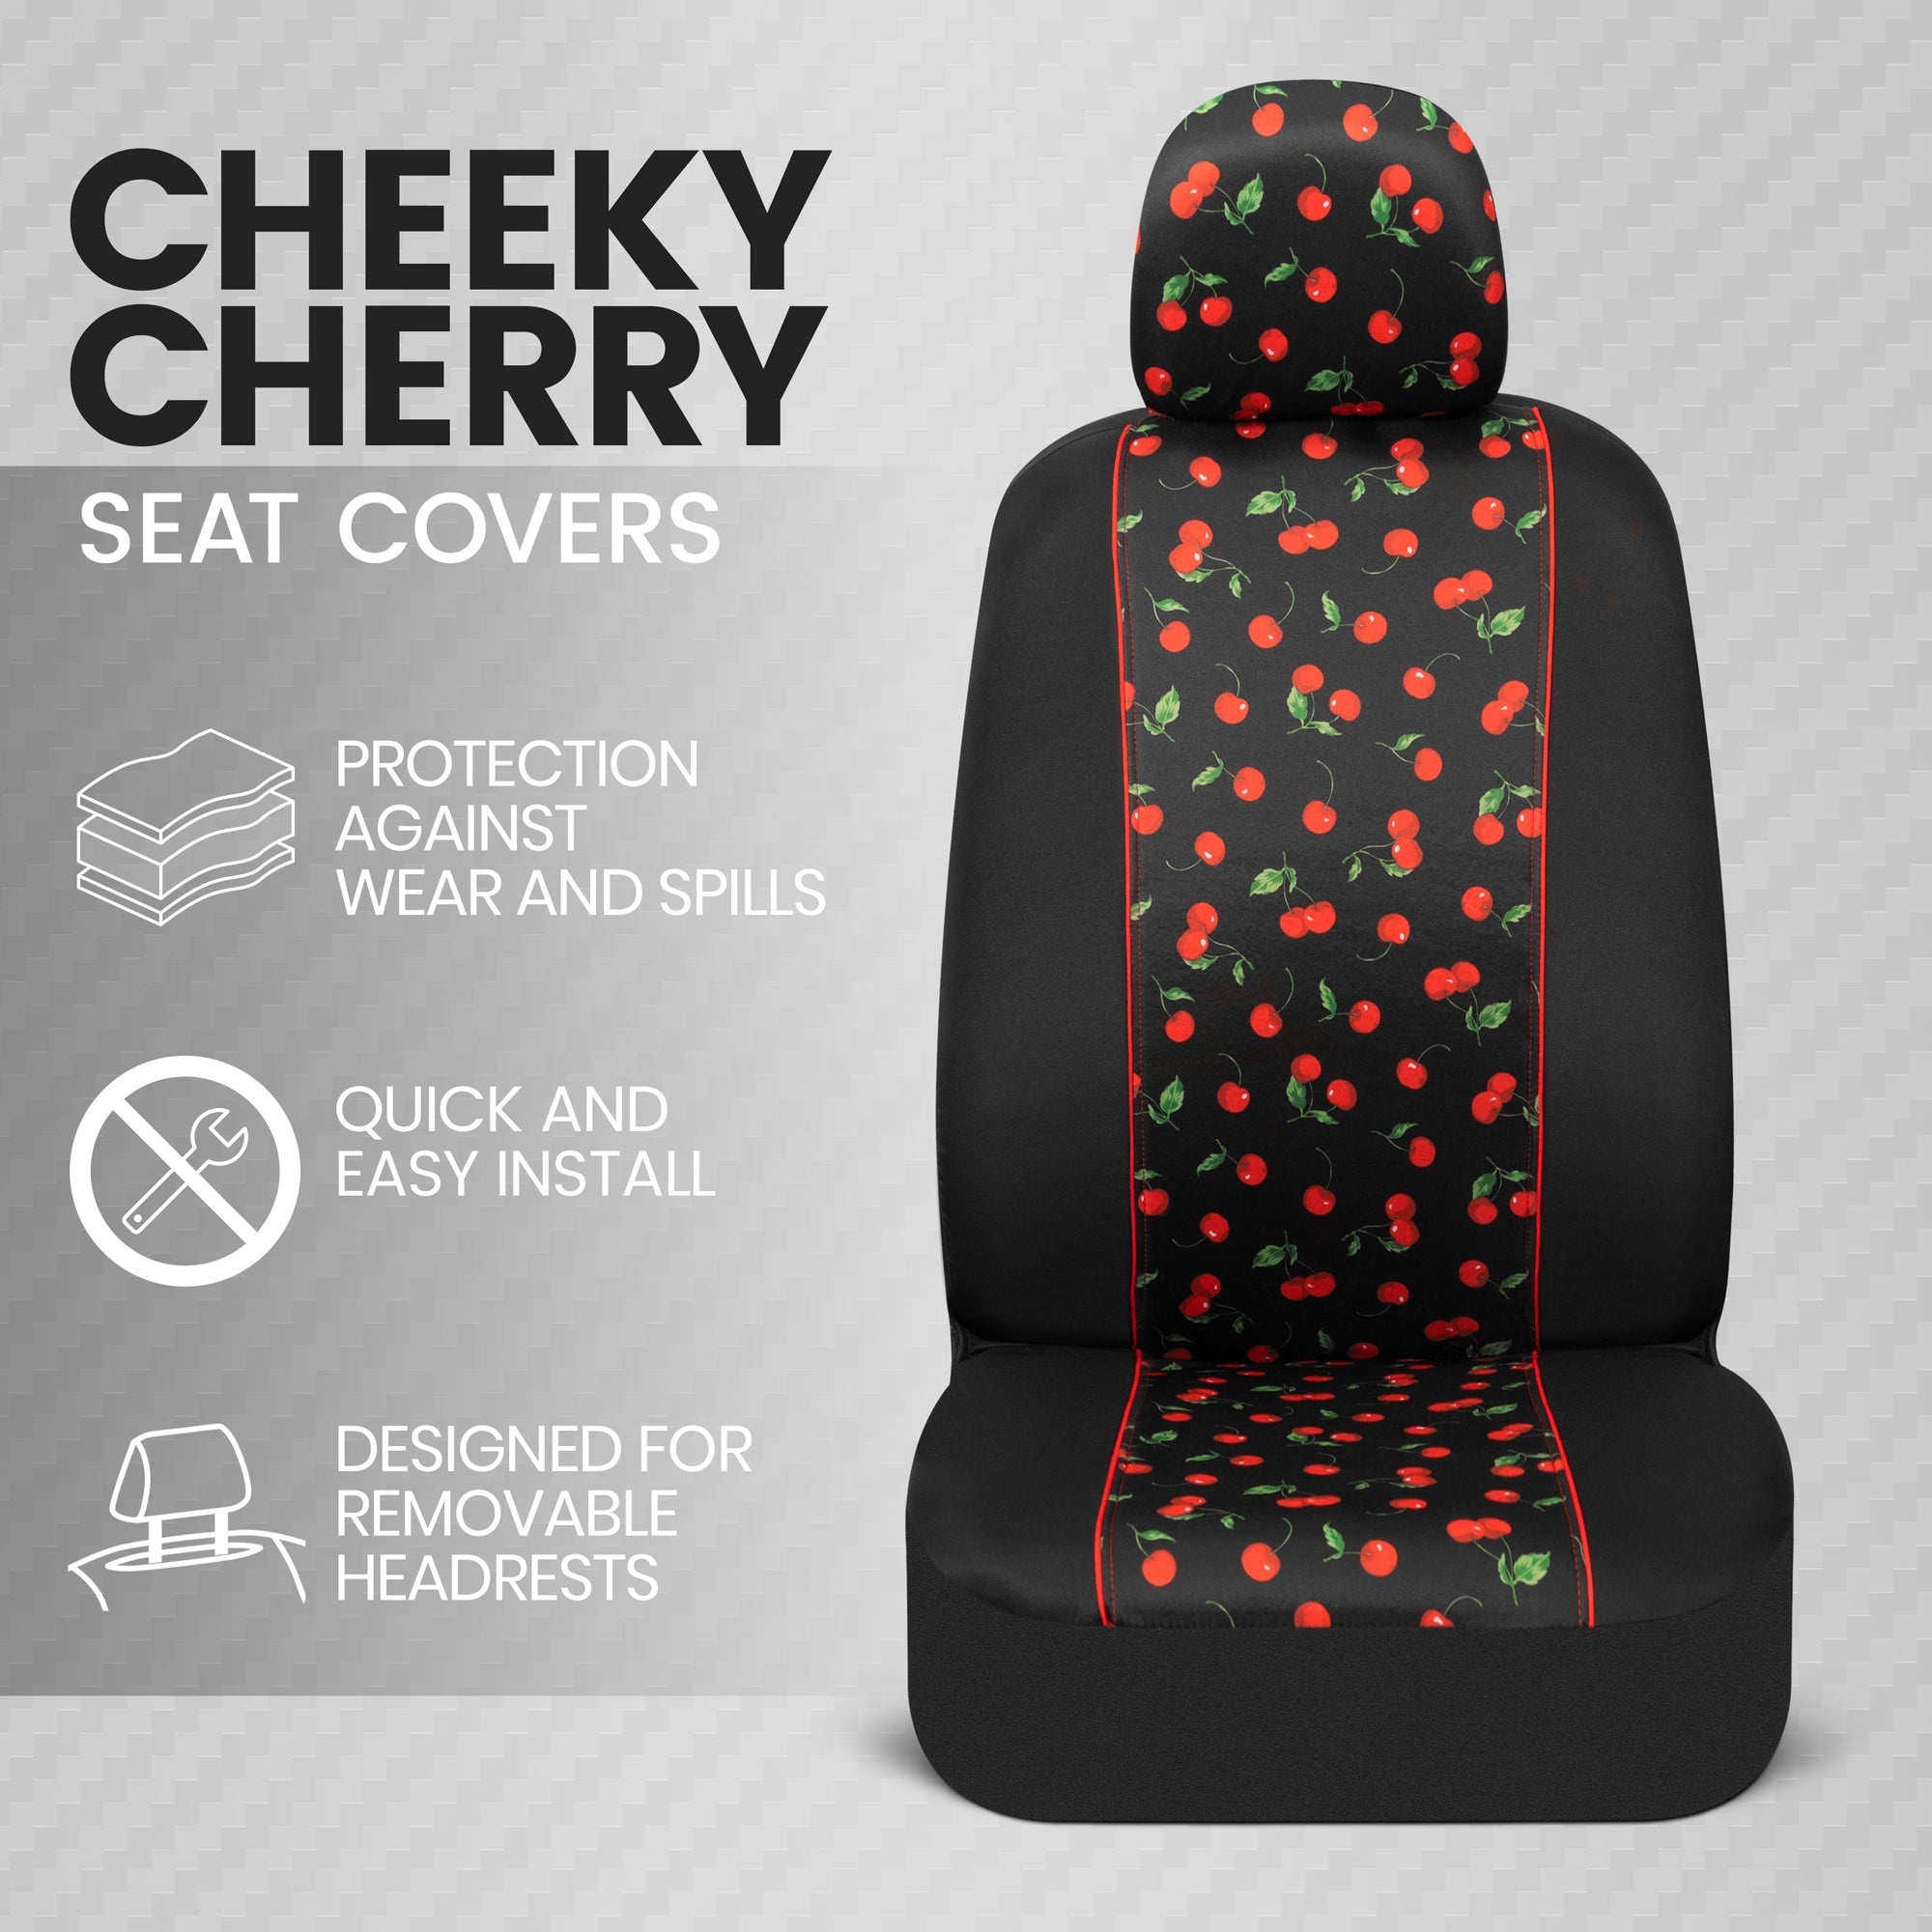 BDK Red Cherry Car Seat Covers for Front Seats, 2 Pack – Classic Pattern Front Seat Cover Set with Matching Headrest, Sideless Design for Easy Installation, Fits Most Car Truck Van and SUV